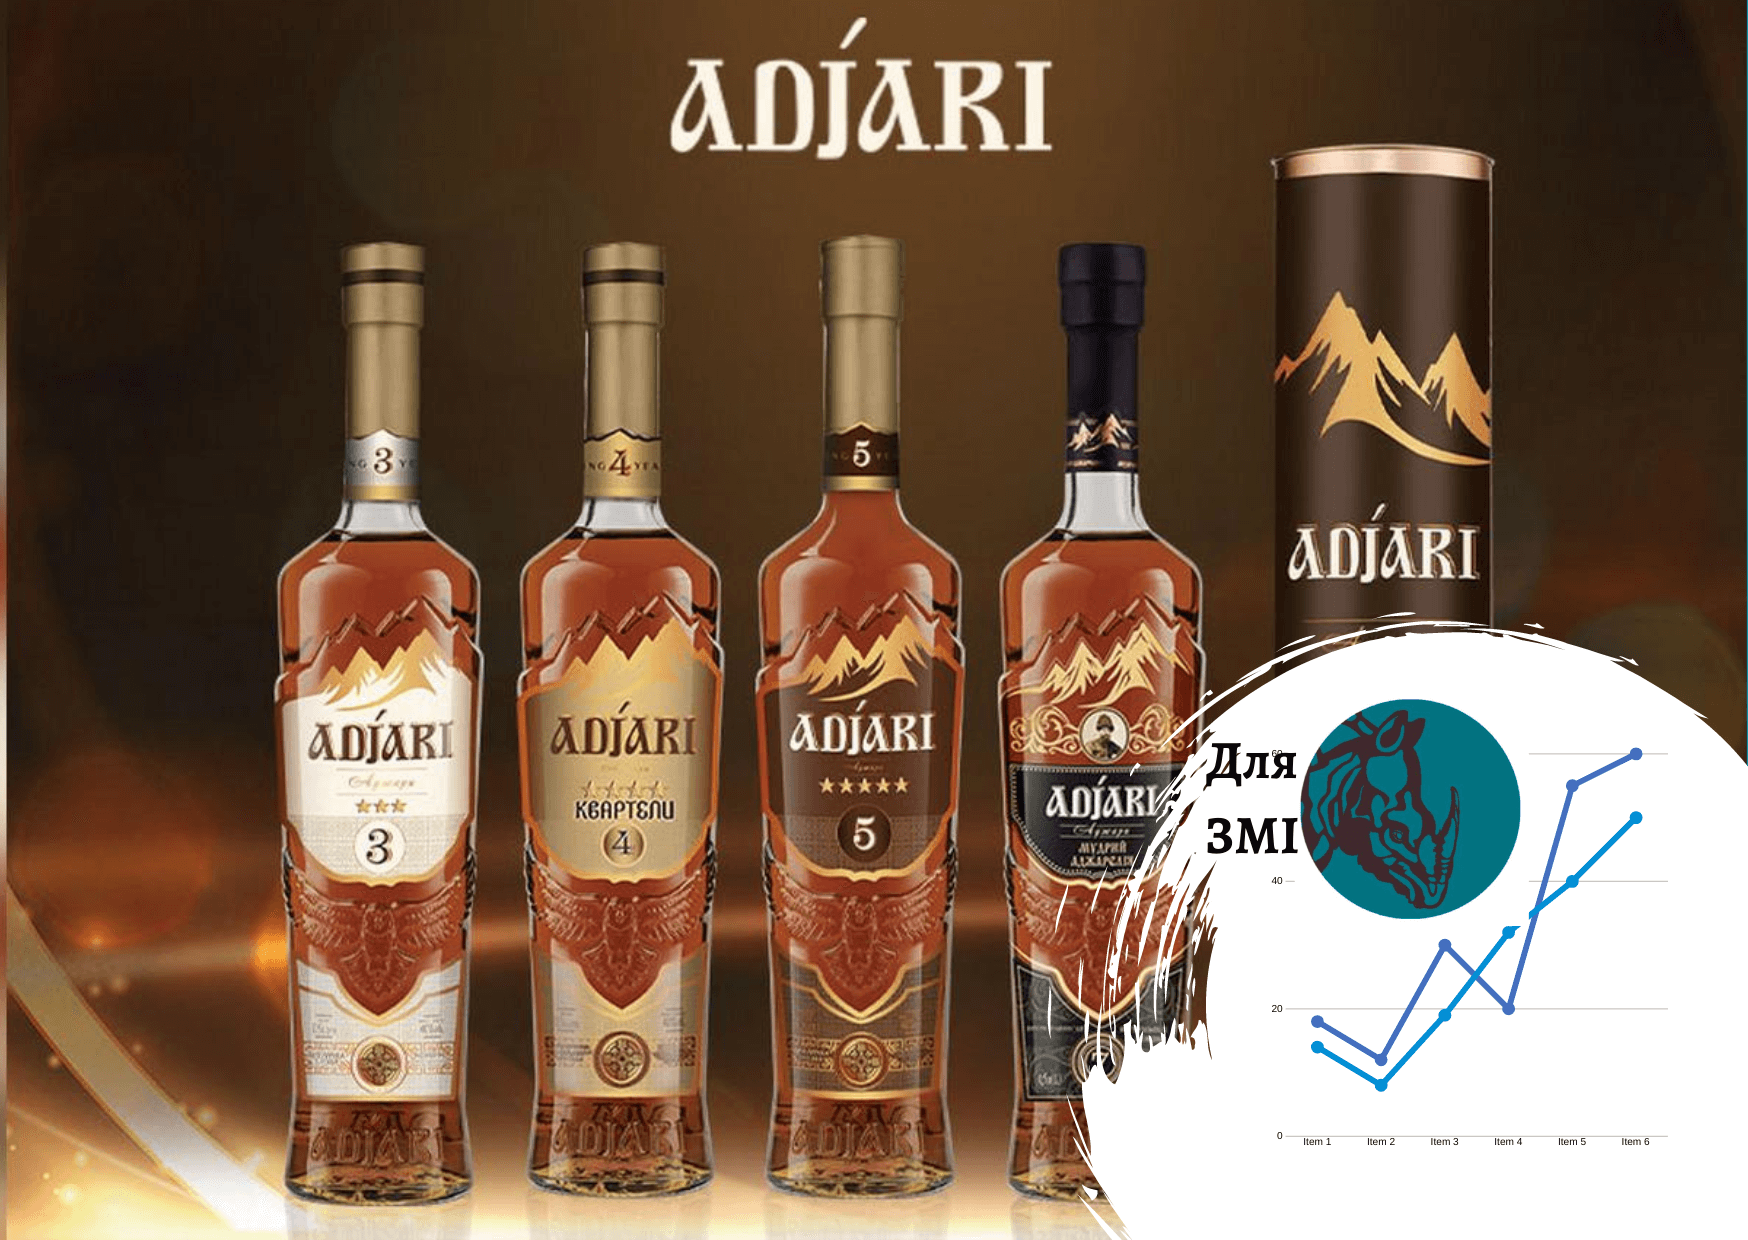 The Adjari brand has updated the product design. Market data by Pro-Consulting. FAKTY.UA